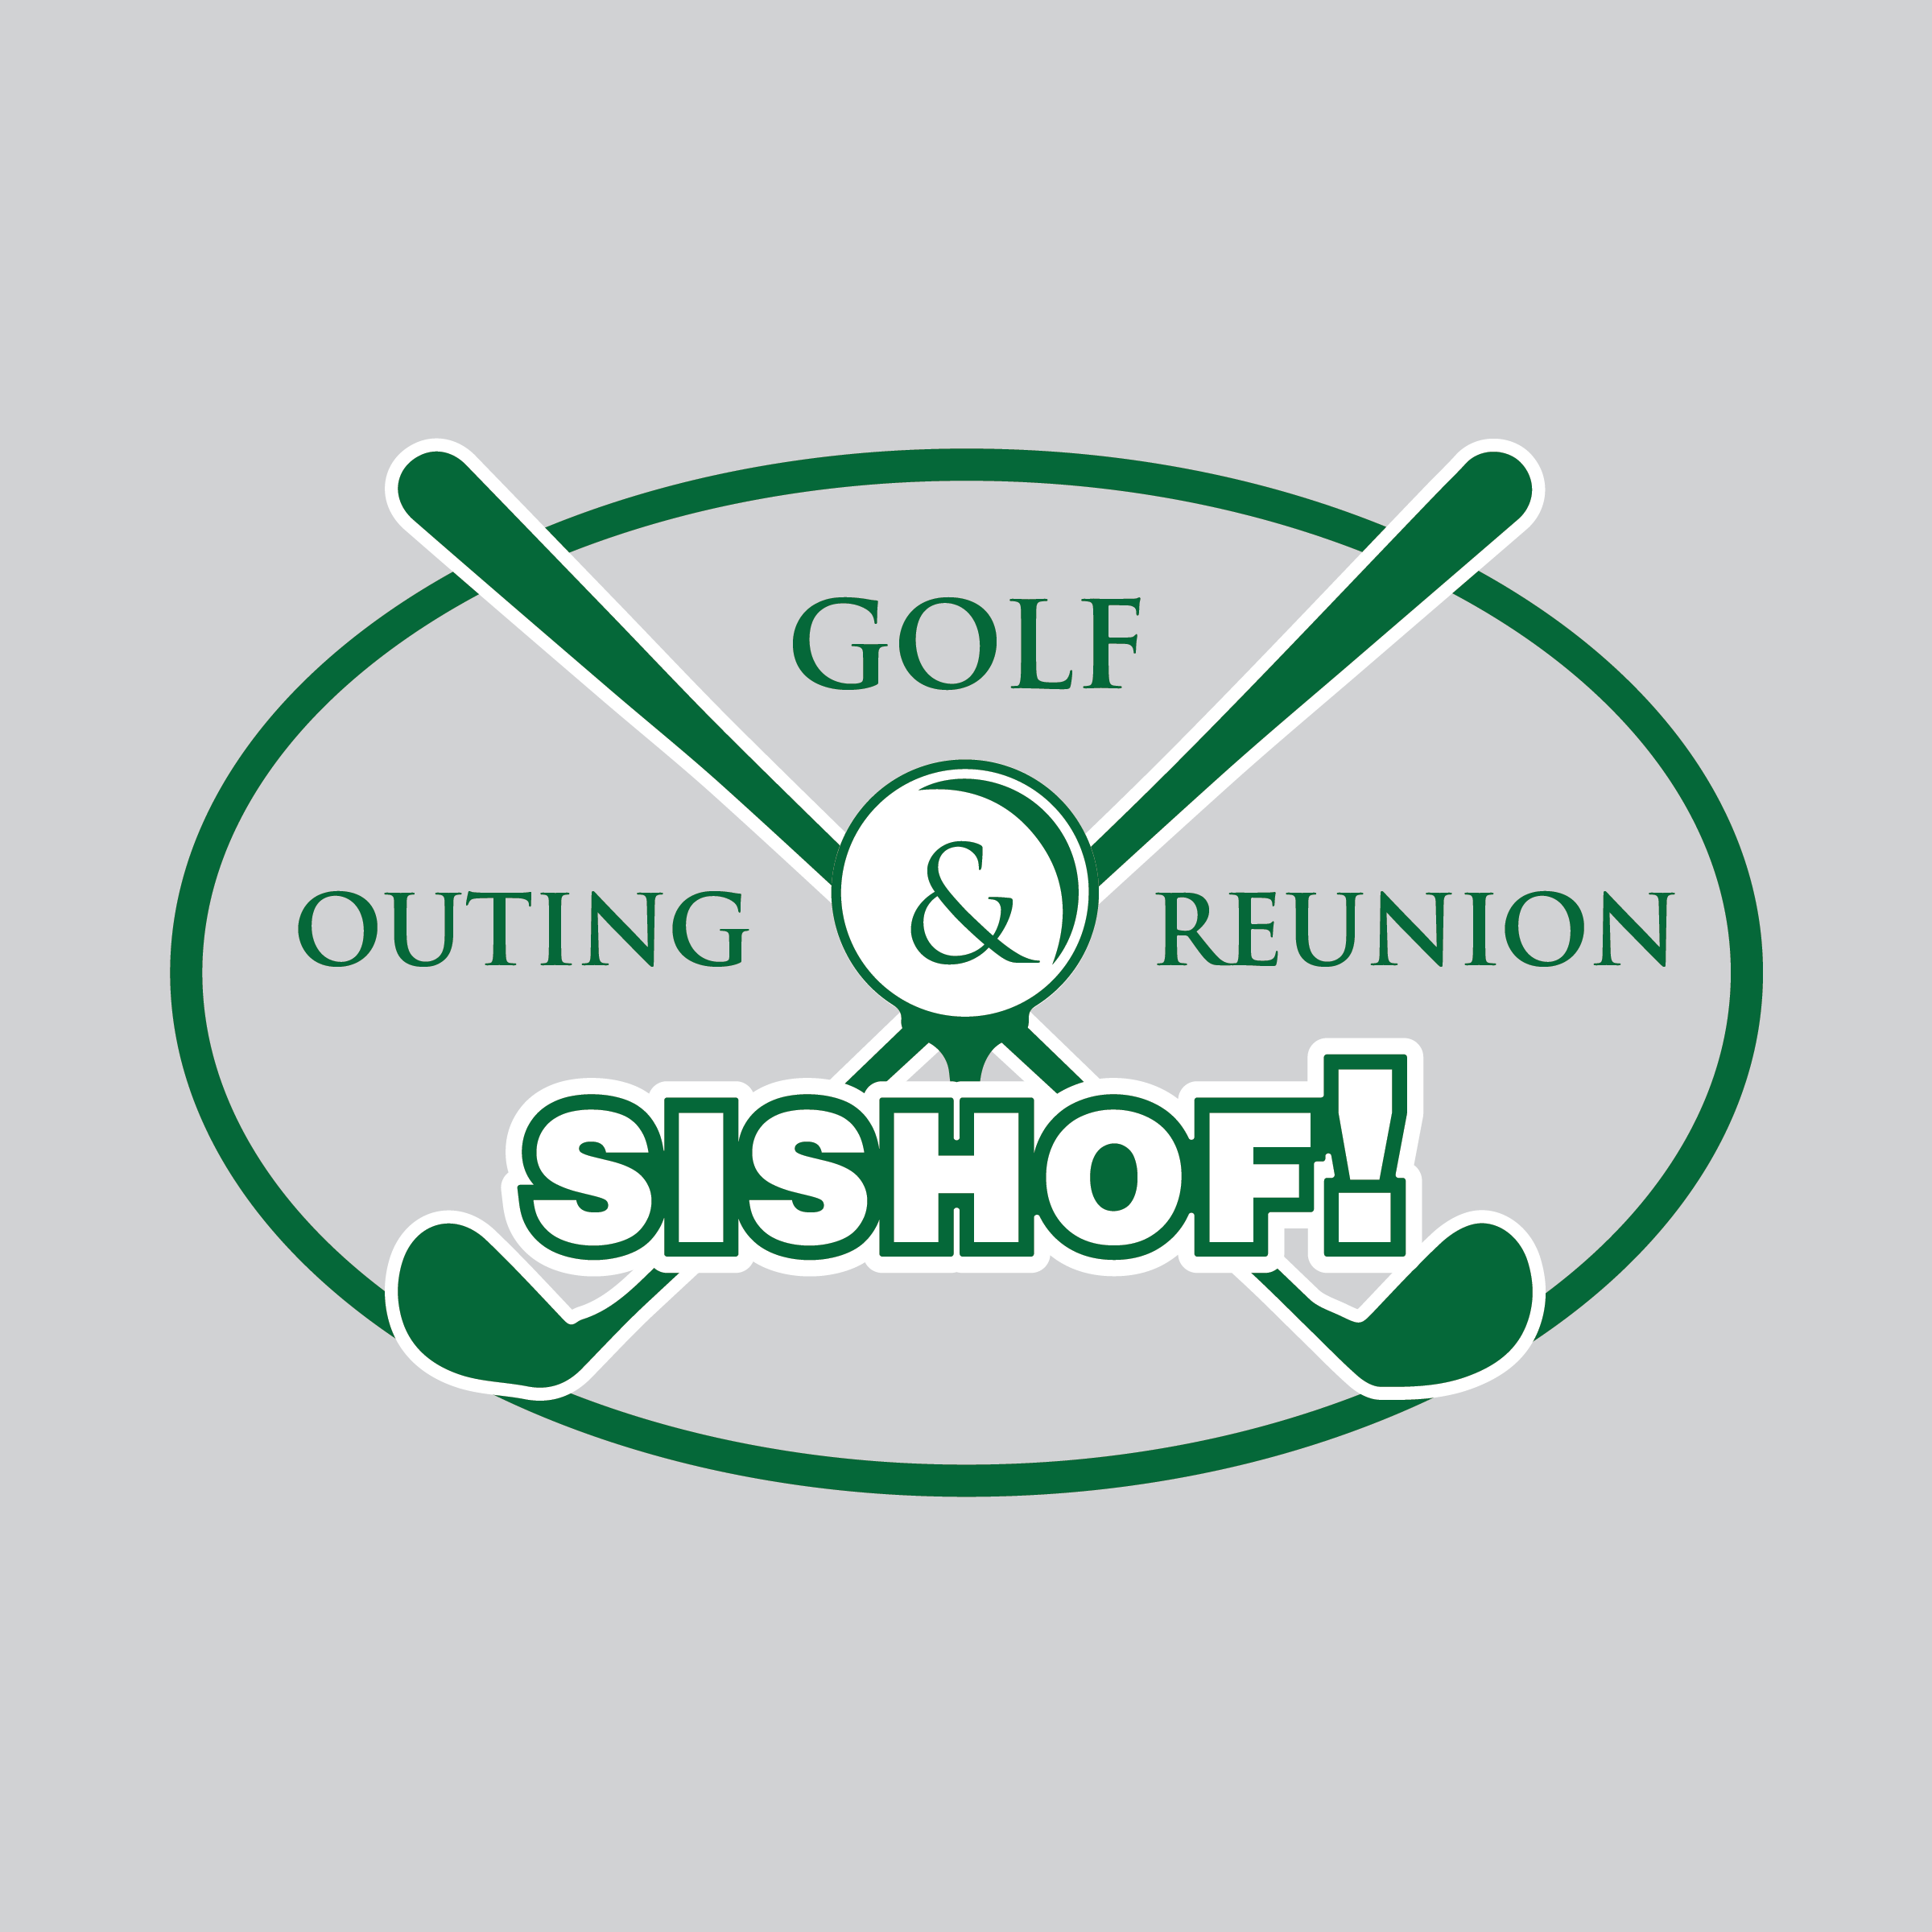 Staten Island Sports Hall of Fame Golf Outing & Reunion Logo